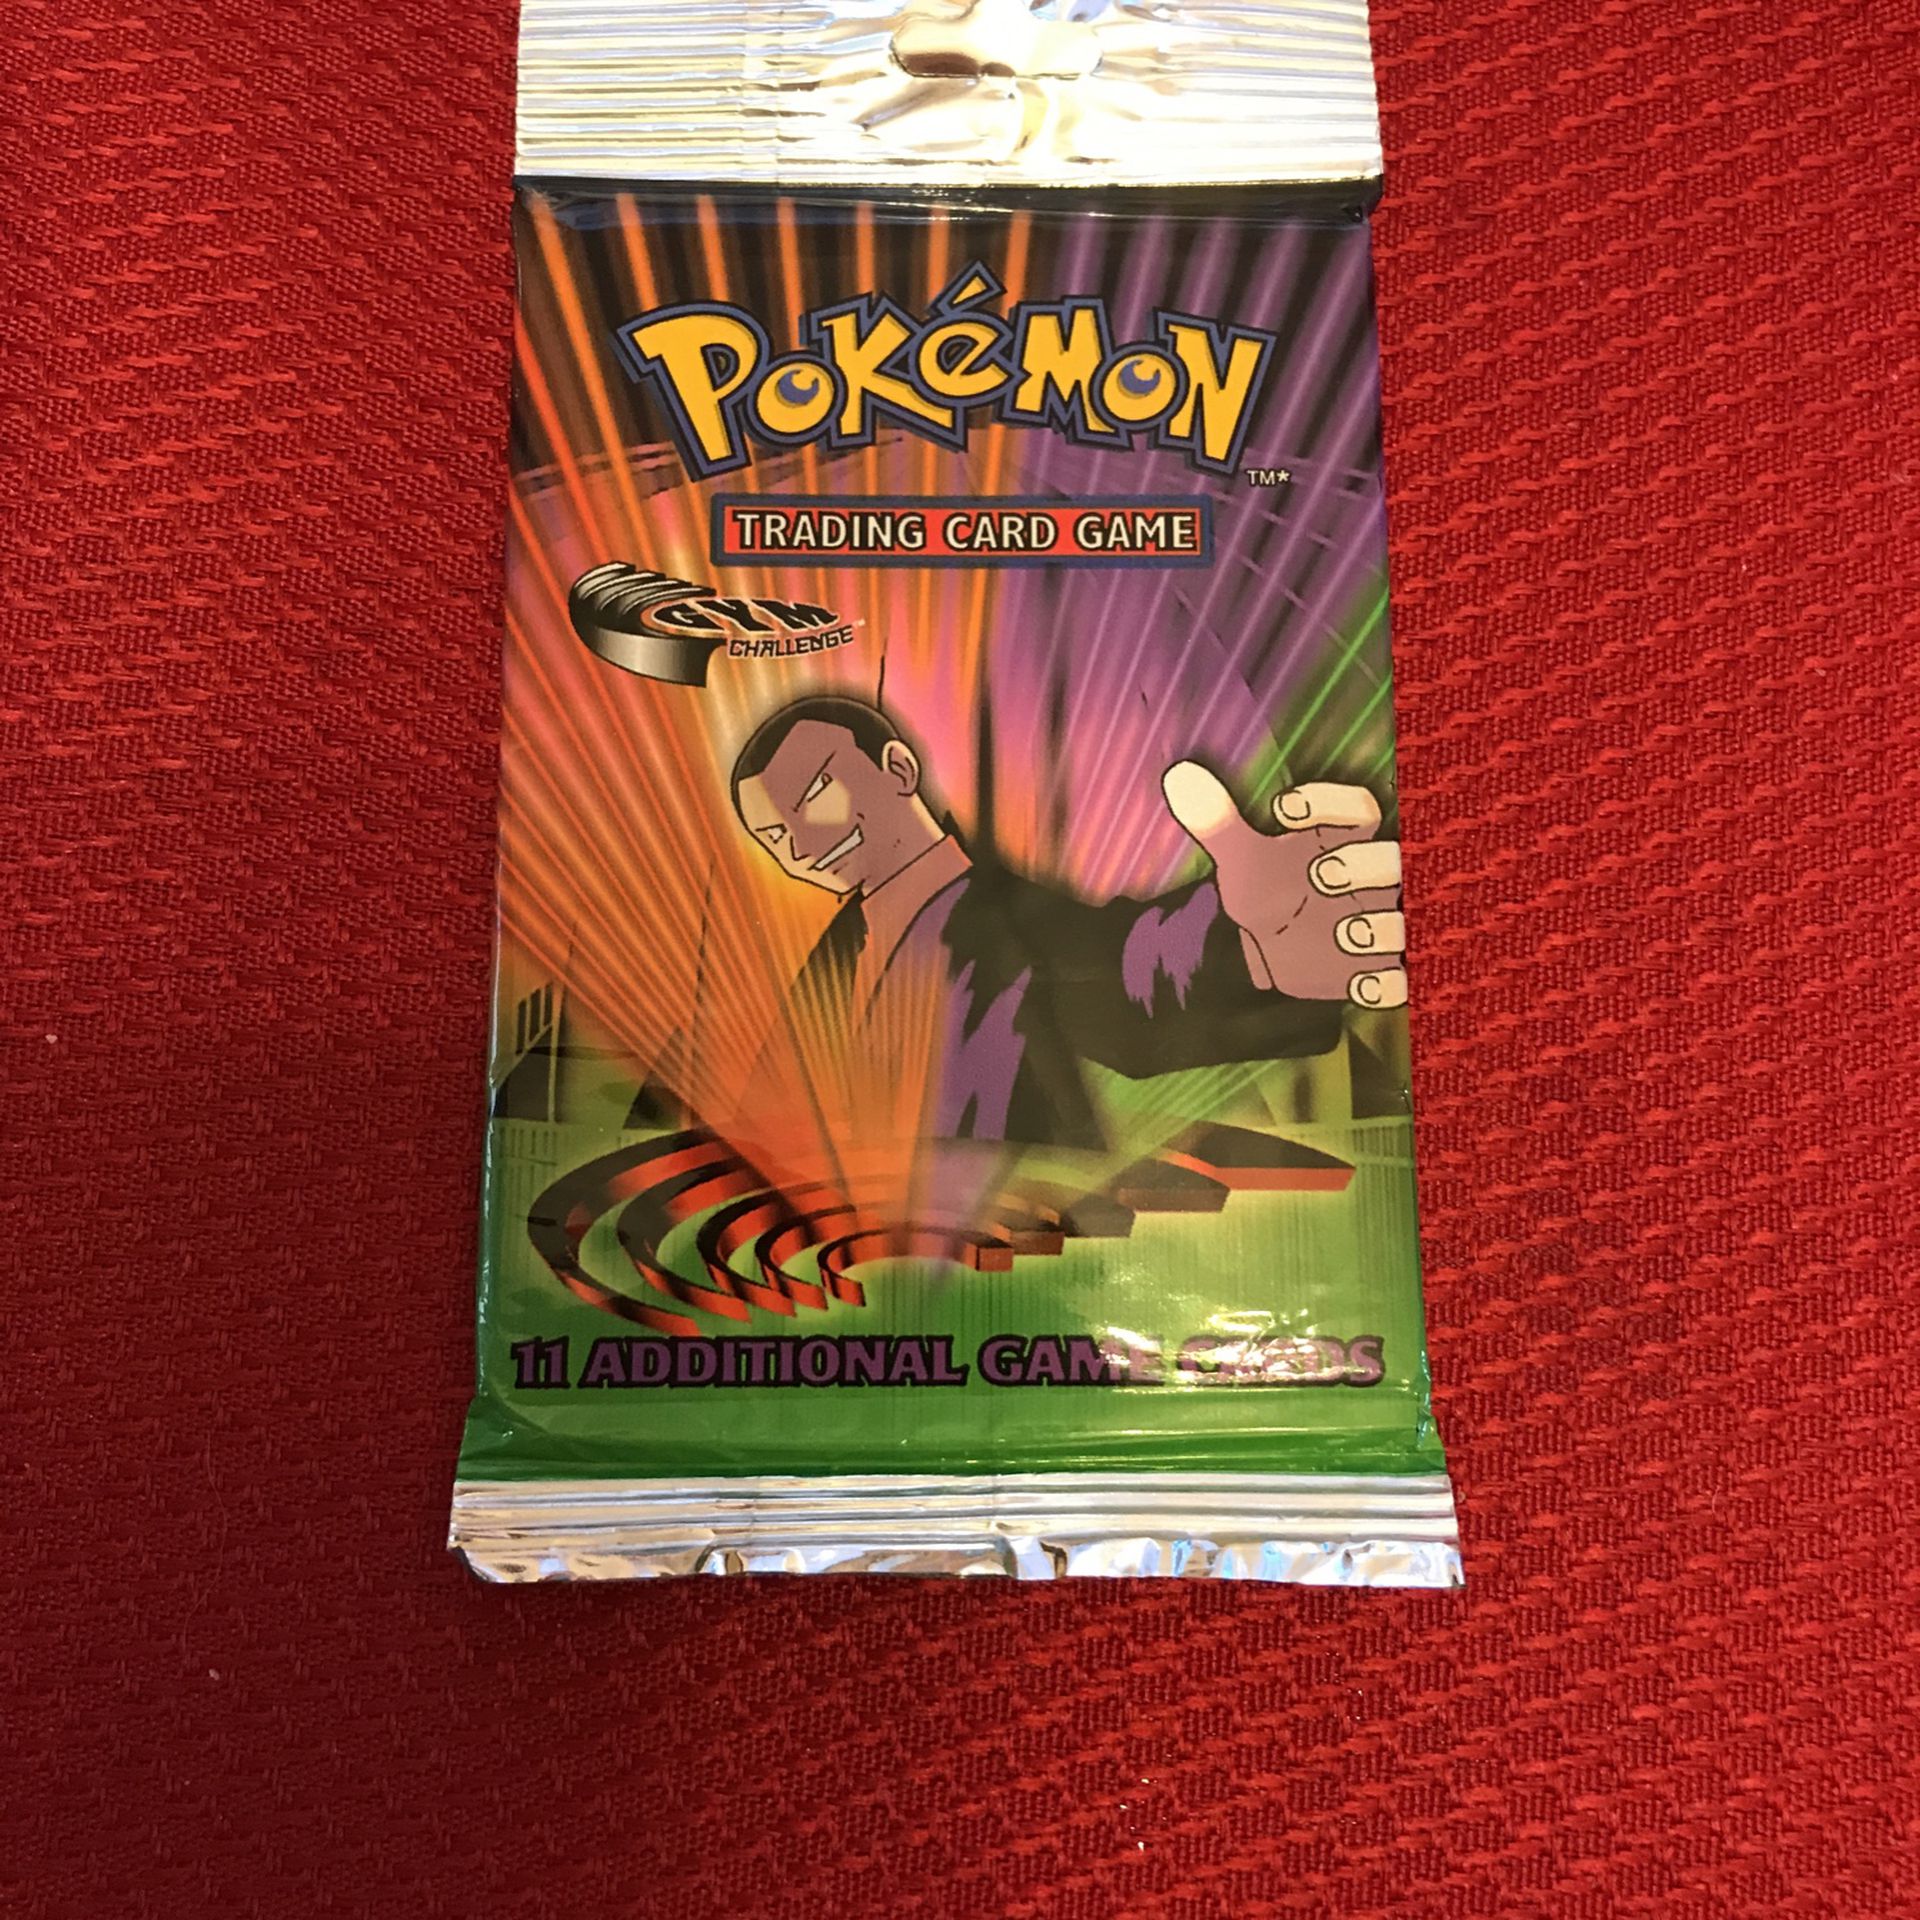 Pokemon Giovanni ImPONE“Gym ChalleNew” Peg-Edition Long Packs Unlimited Edition BSPOKEMON GIOVANNI  (Wizards Of The Coast Collection Series) “Rare-